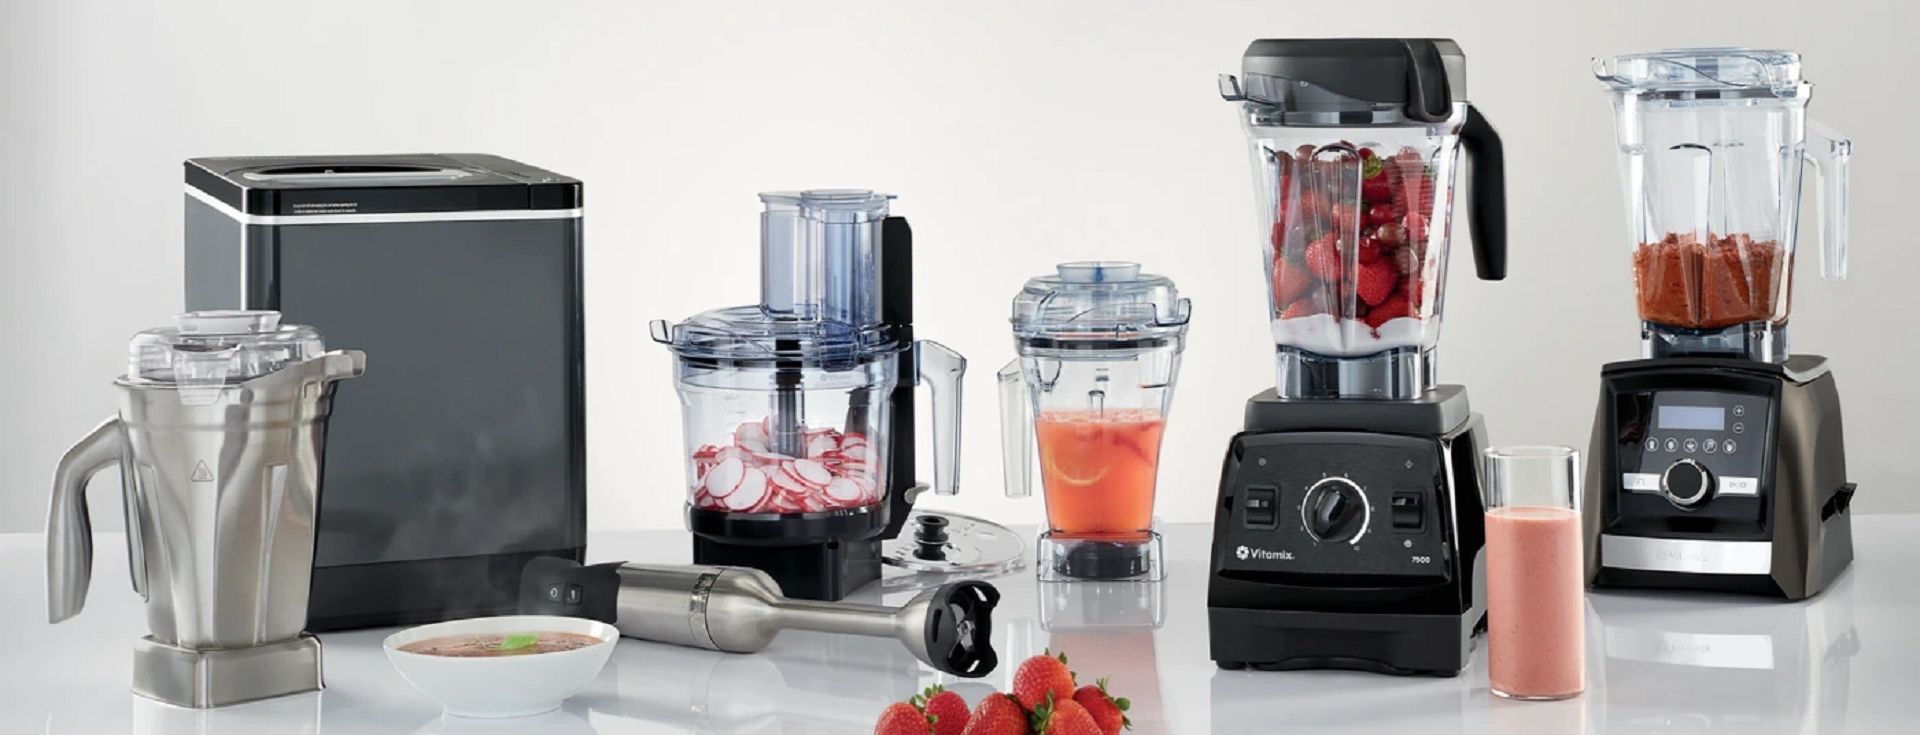 Top 3 Reasons to Buy A Vitamix Blender